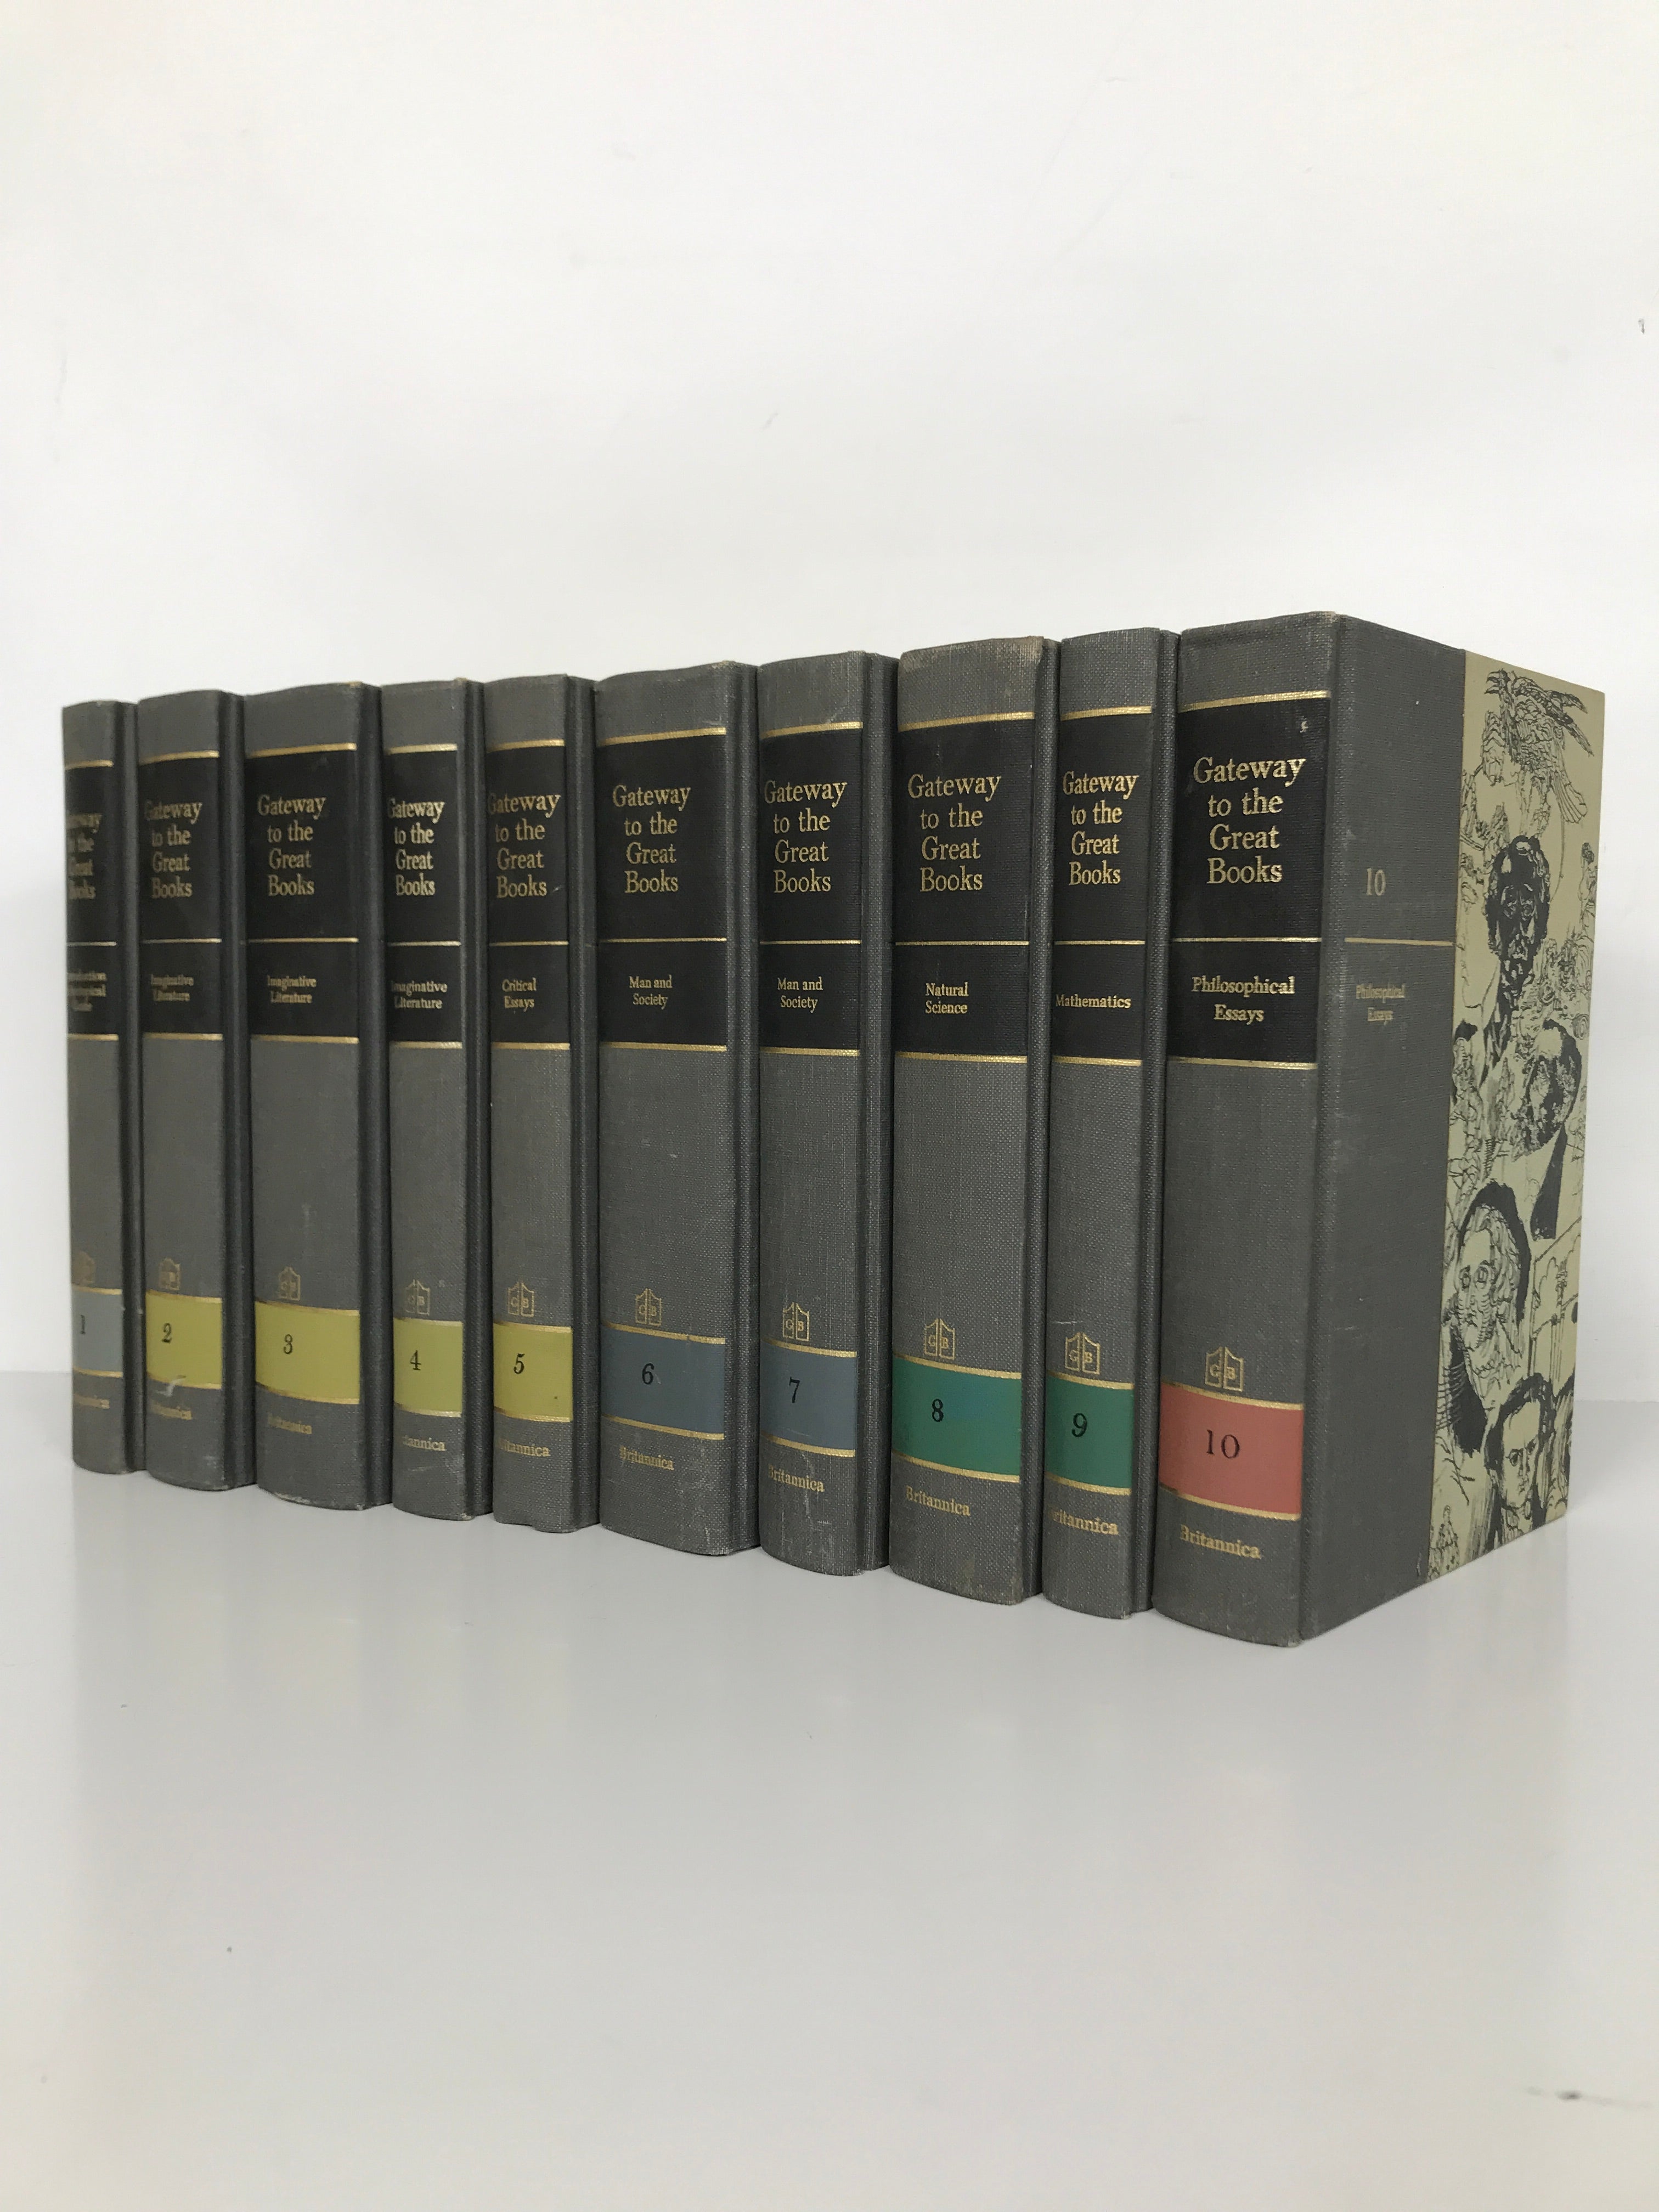 Gateway to the Great Books Encyclopedia Britannica Complete Set 1963 HC